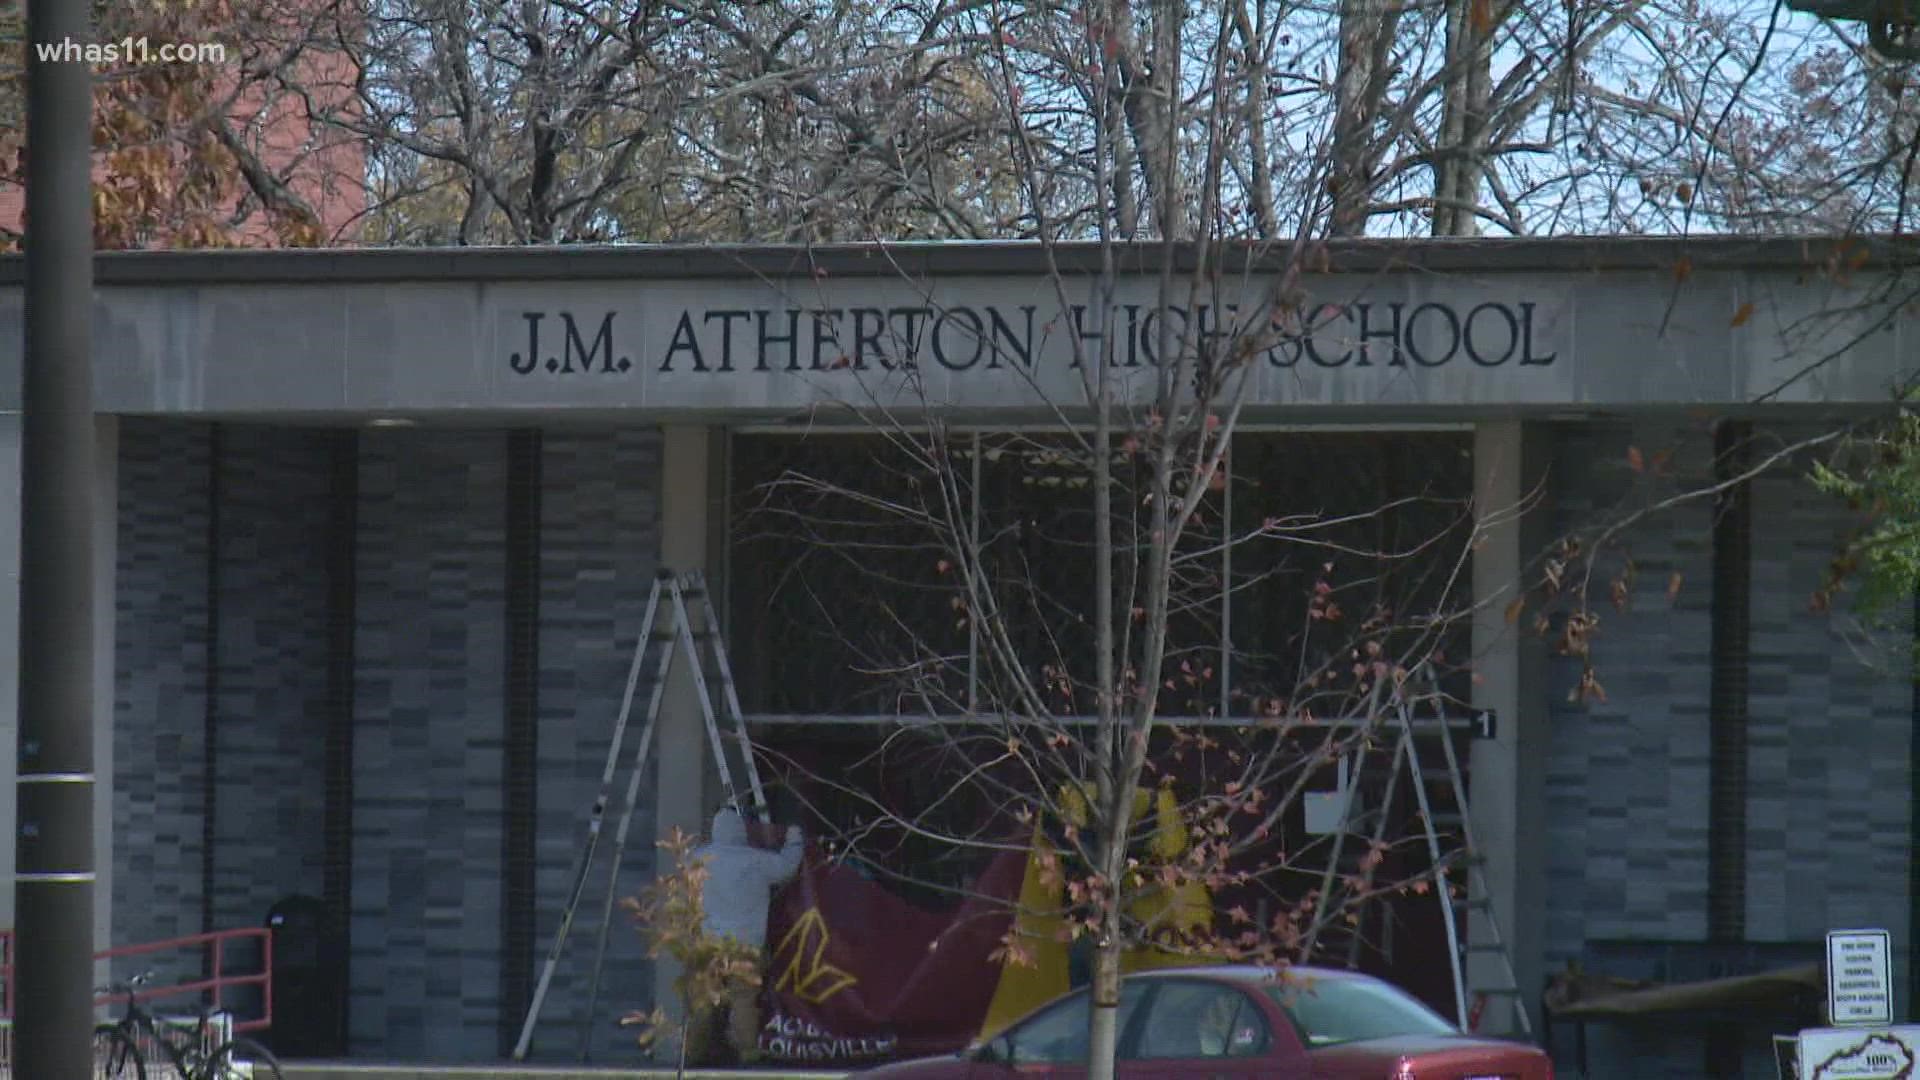 Both guns were found after classmates alerted school staff to the weapons. Atherton High went into lockdown. The other school was McFerran Preparatory Academy.